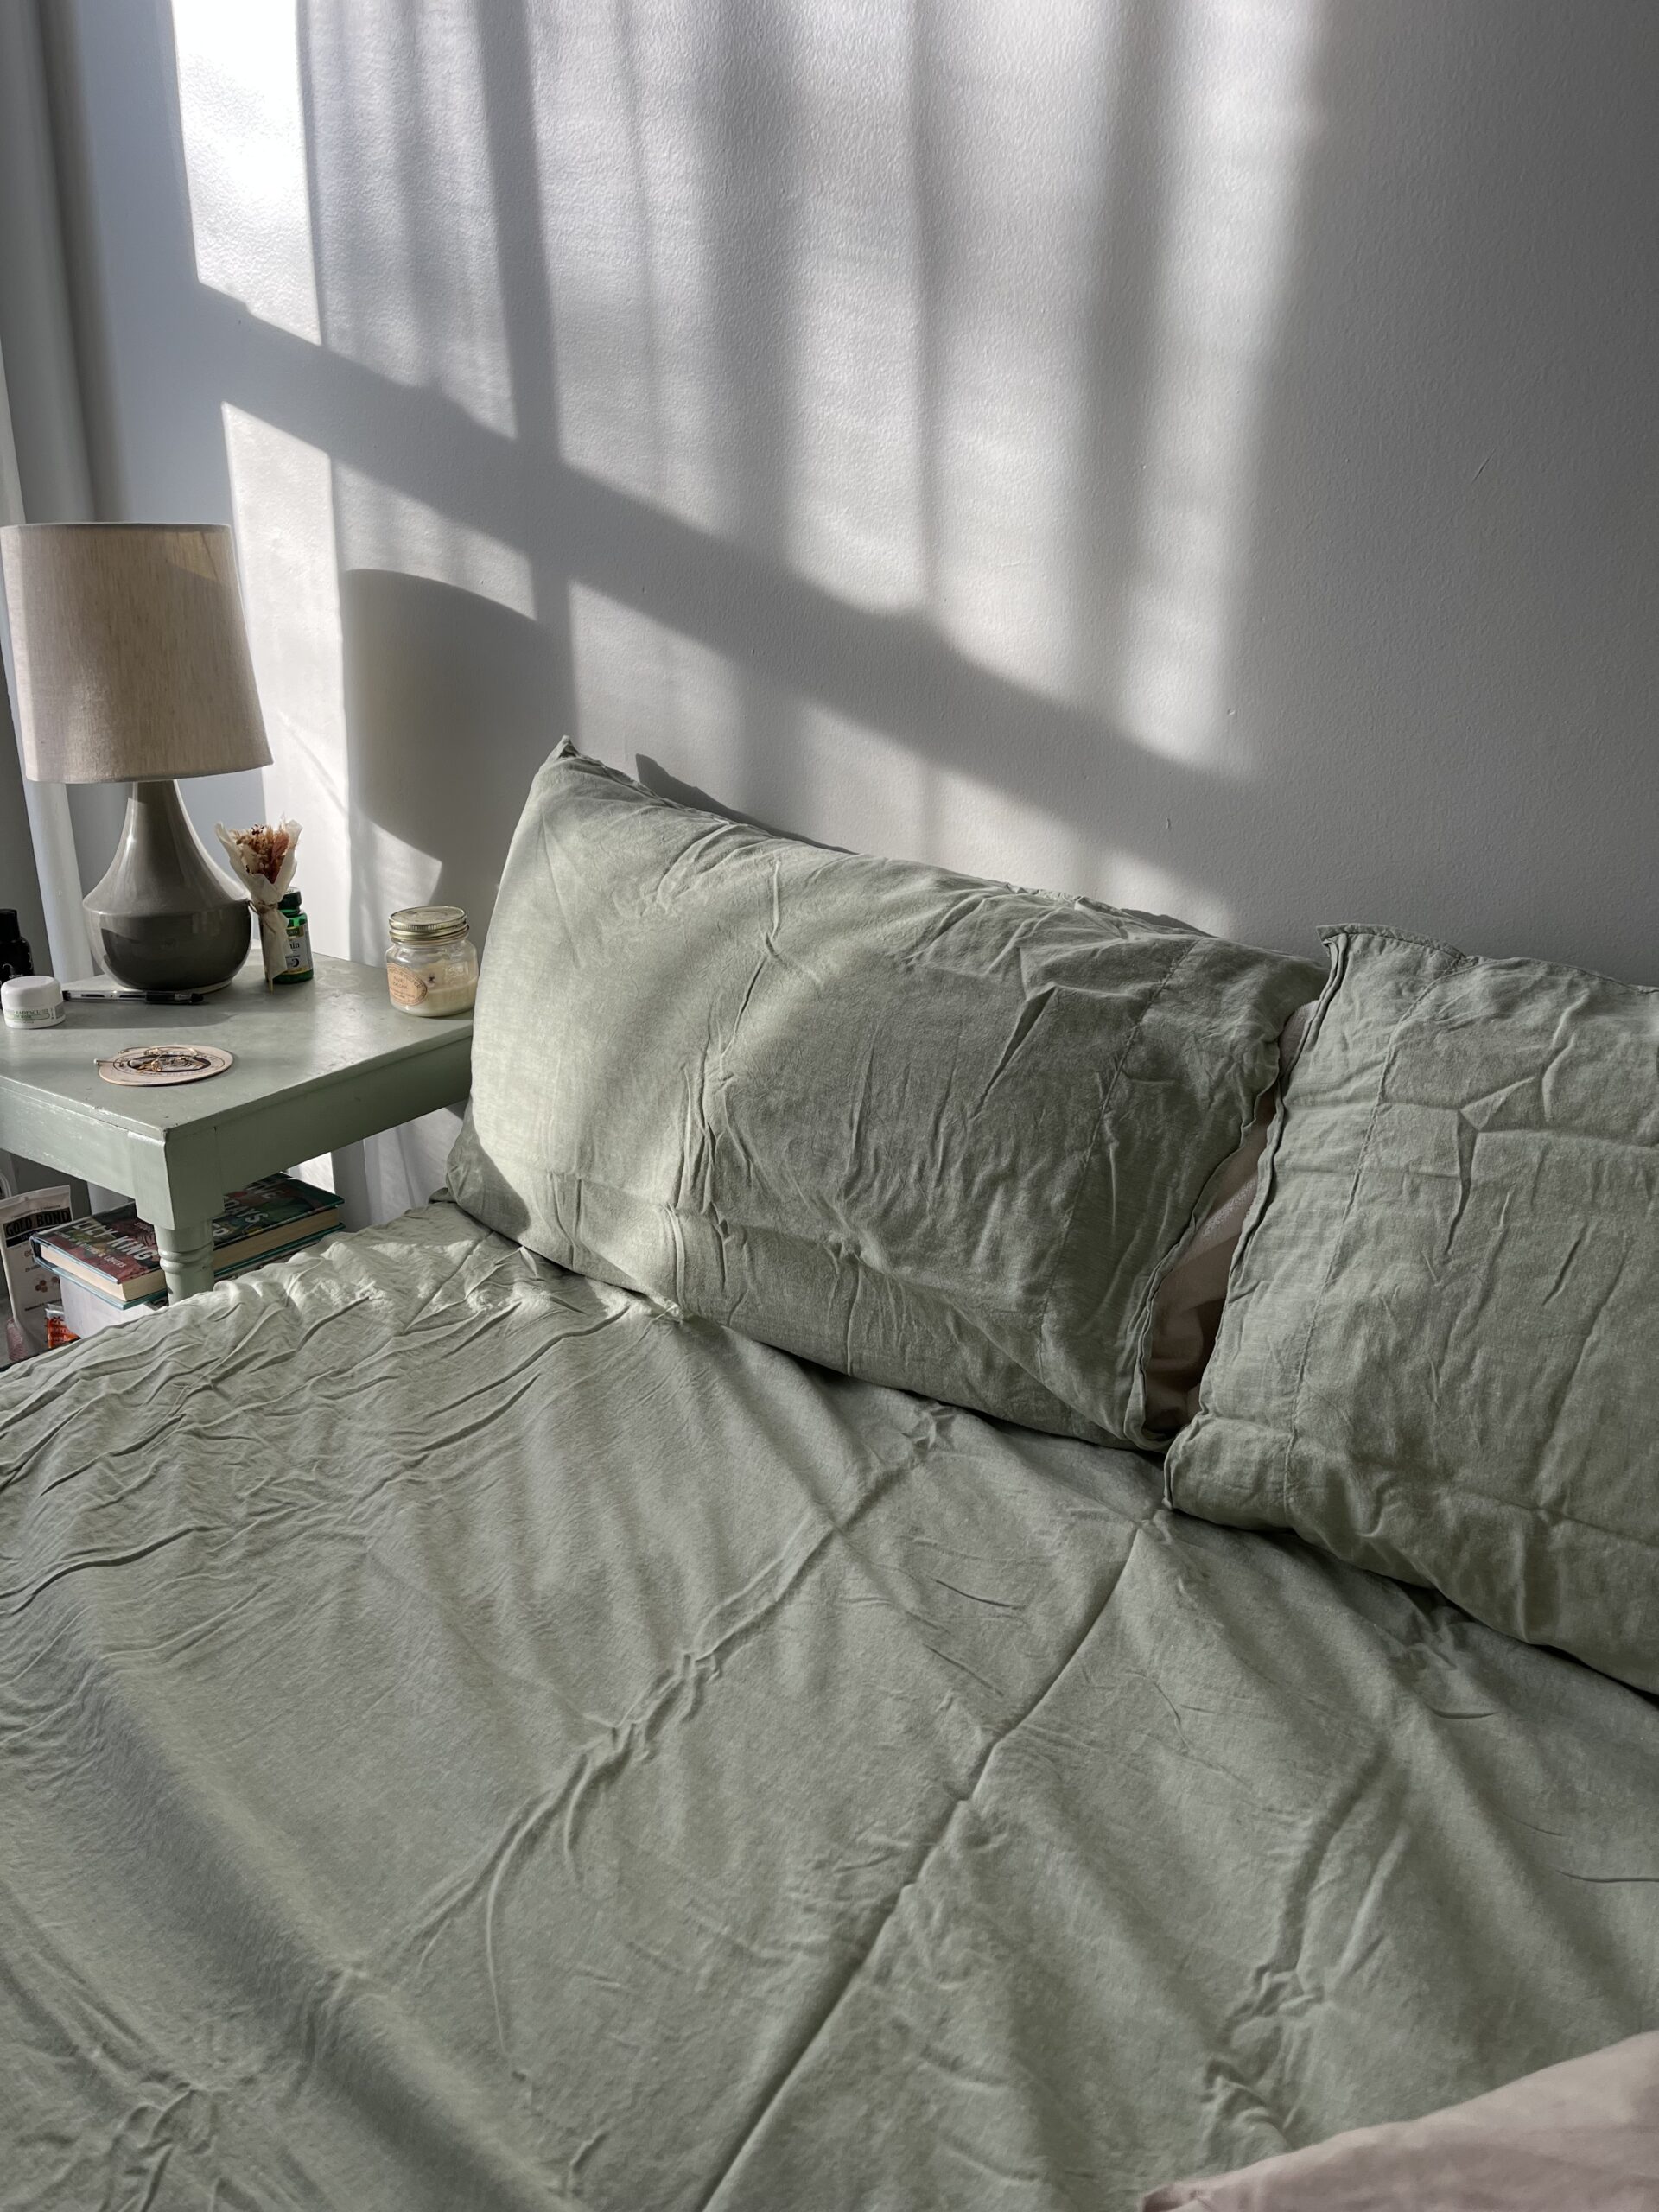 The author's bed made up in Under the Canopy eucalyptus linen sheets.